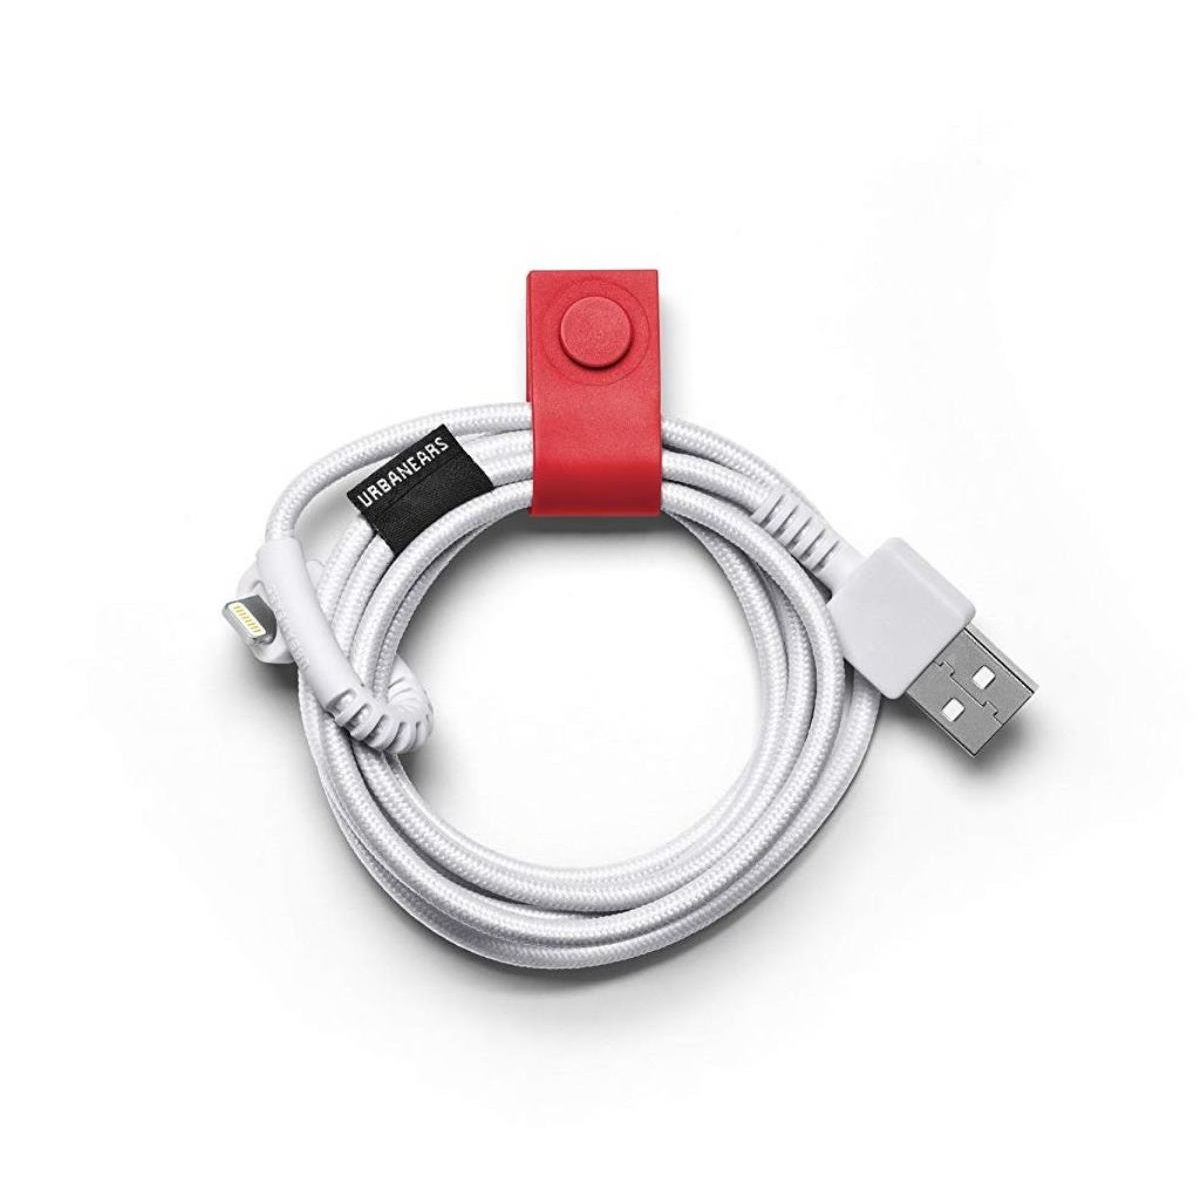 URBANEARS The Rot Kabel Acrobatic Cable Clip, Tomato Clip